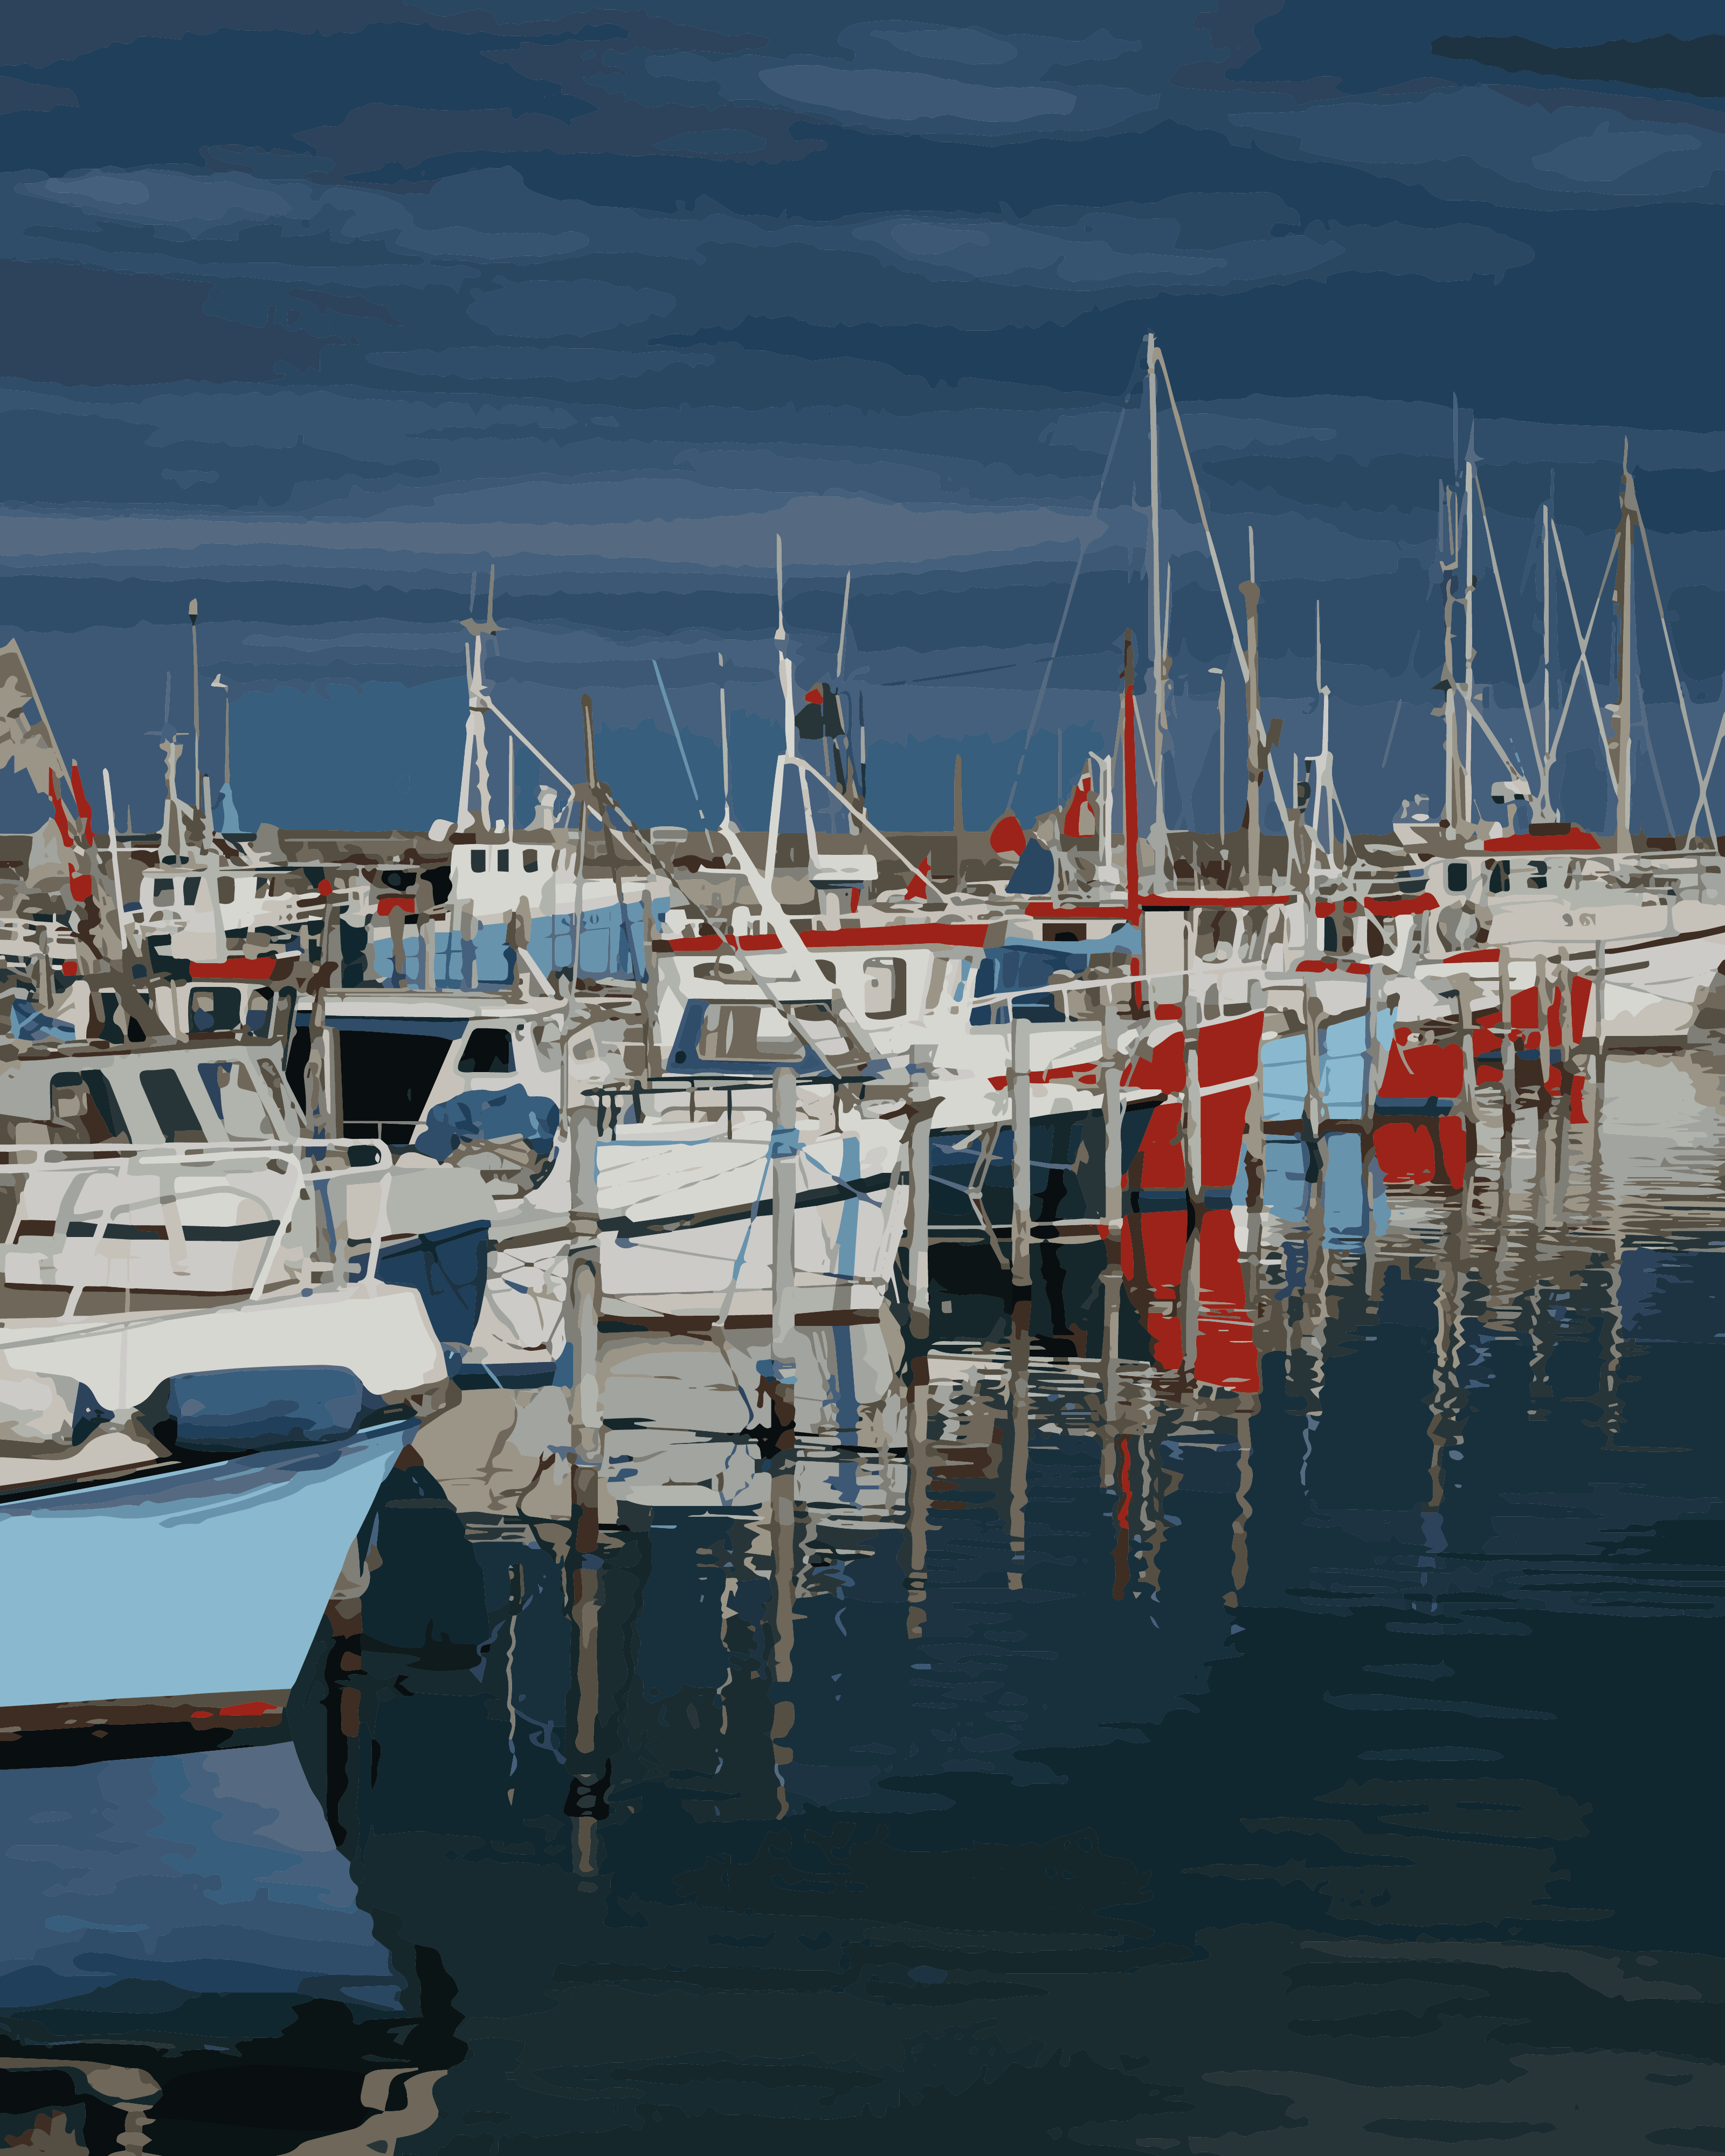 Skagen harbour reflections, photography and illustration by Xavier Wendling